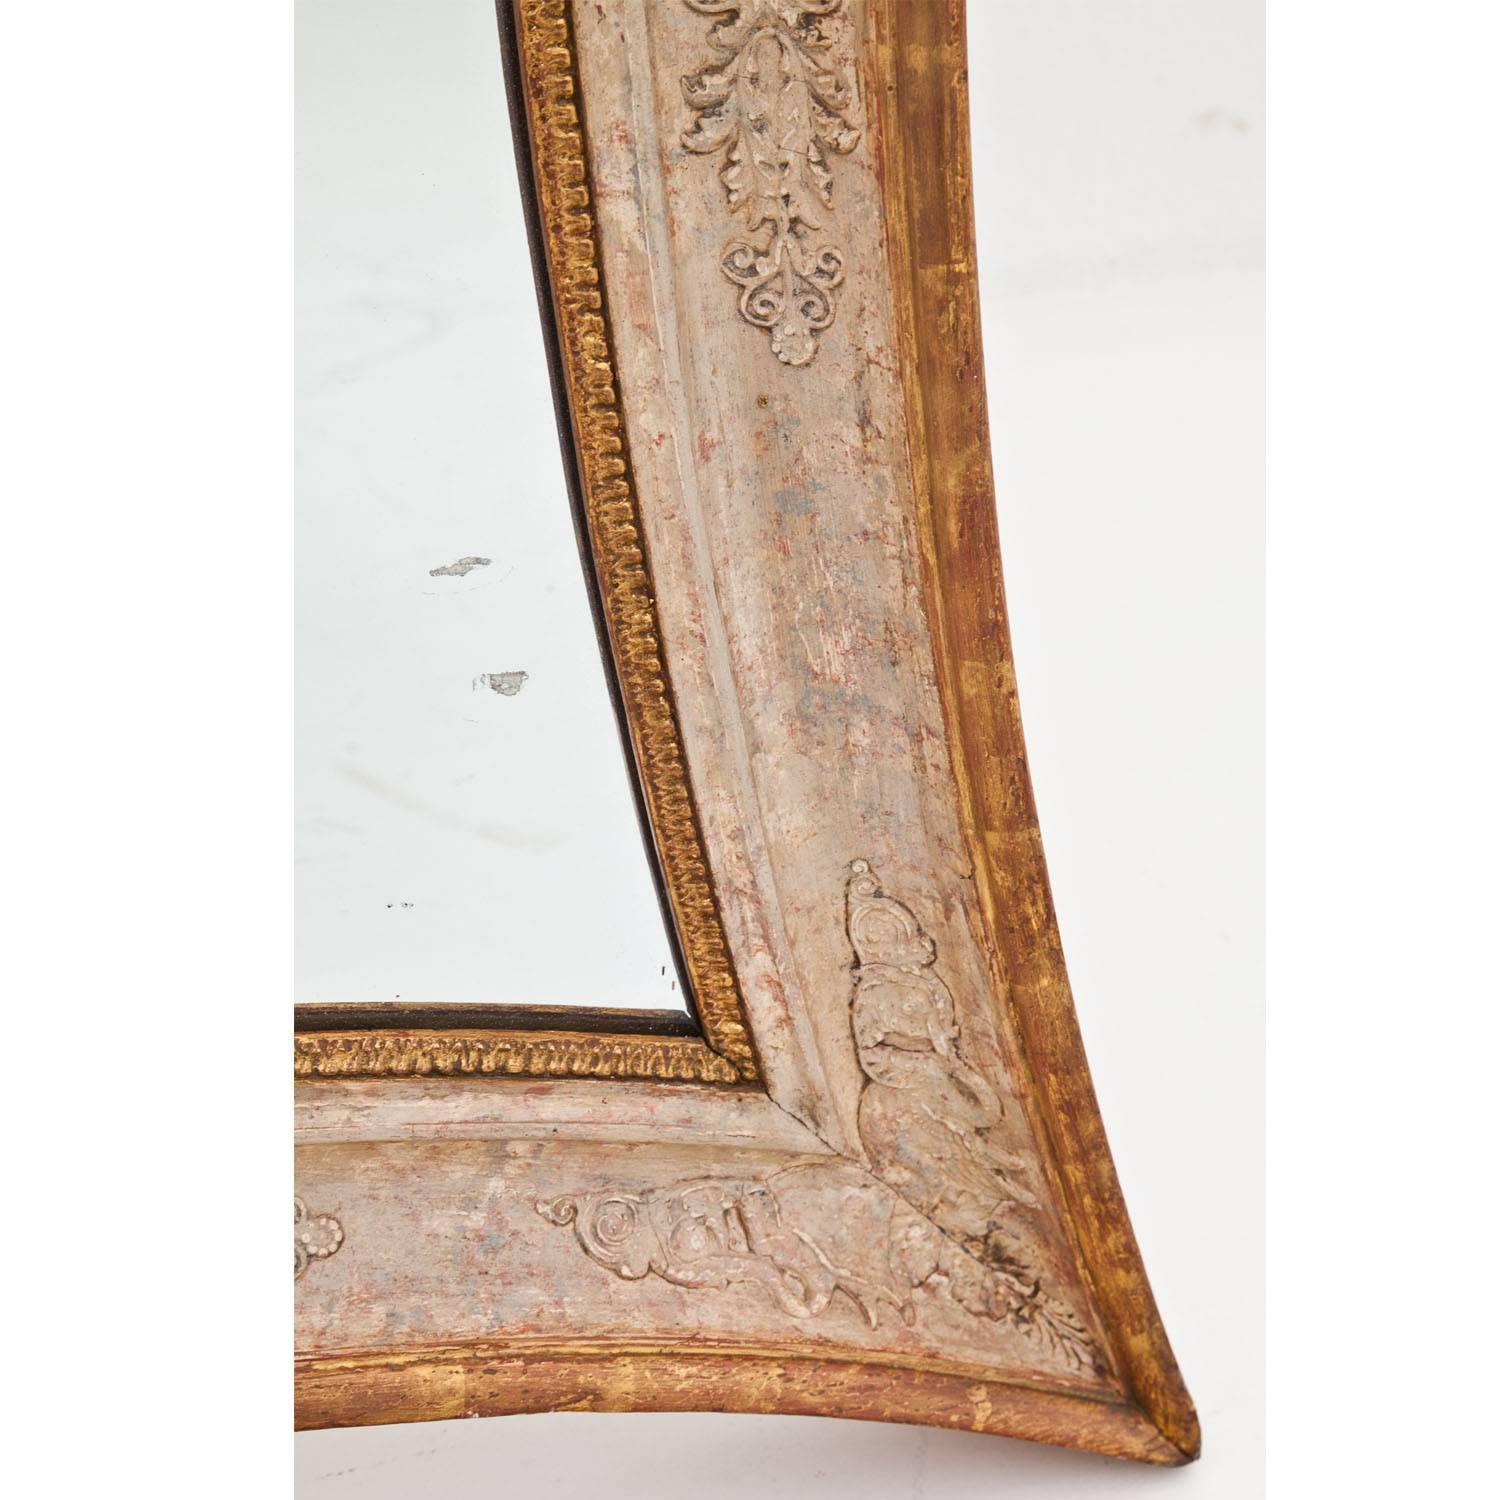 Empire mirror in a concave frame with white painted stucco décor in the typical style of the Empire. The mirror glass is secondary; the decors show some wear. 
Dimensions mirror glass in cm (H x W x D):
67 x 54.